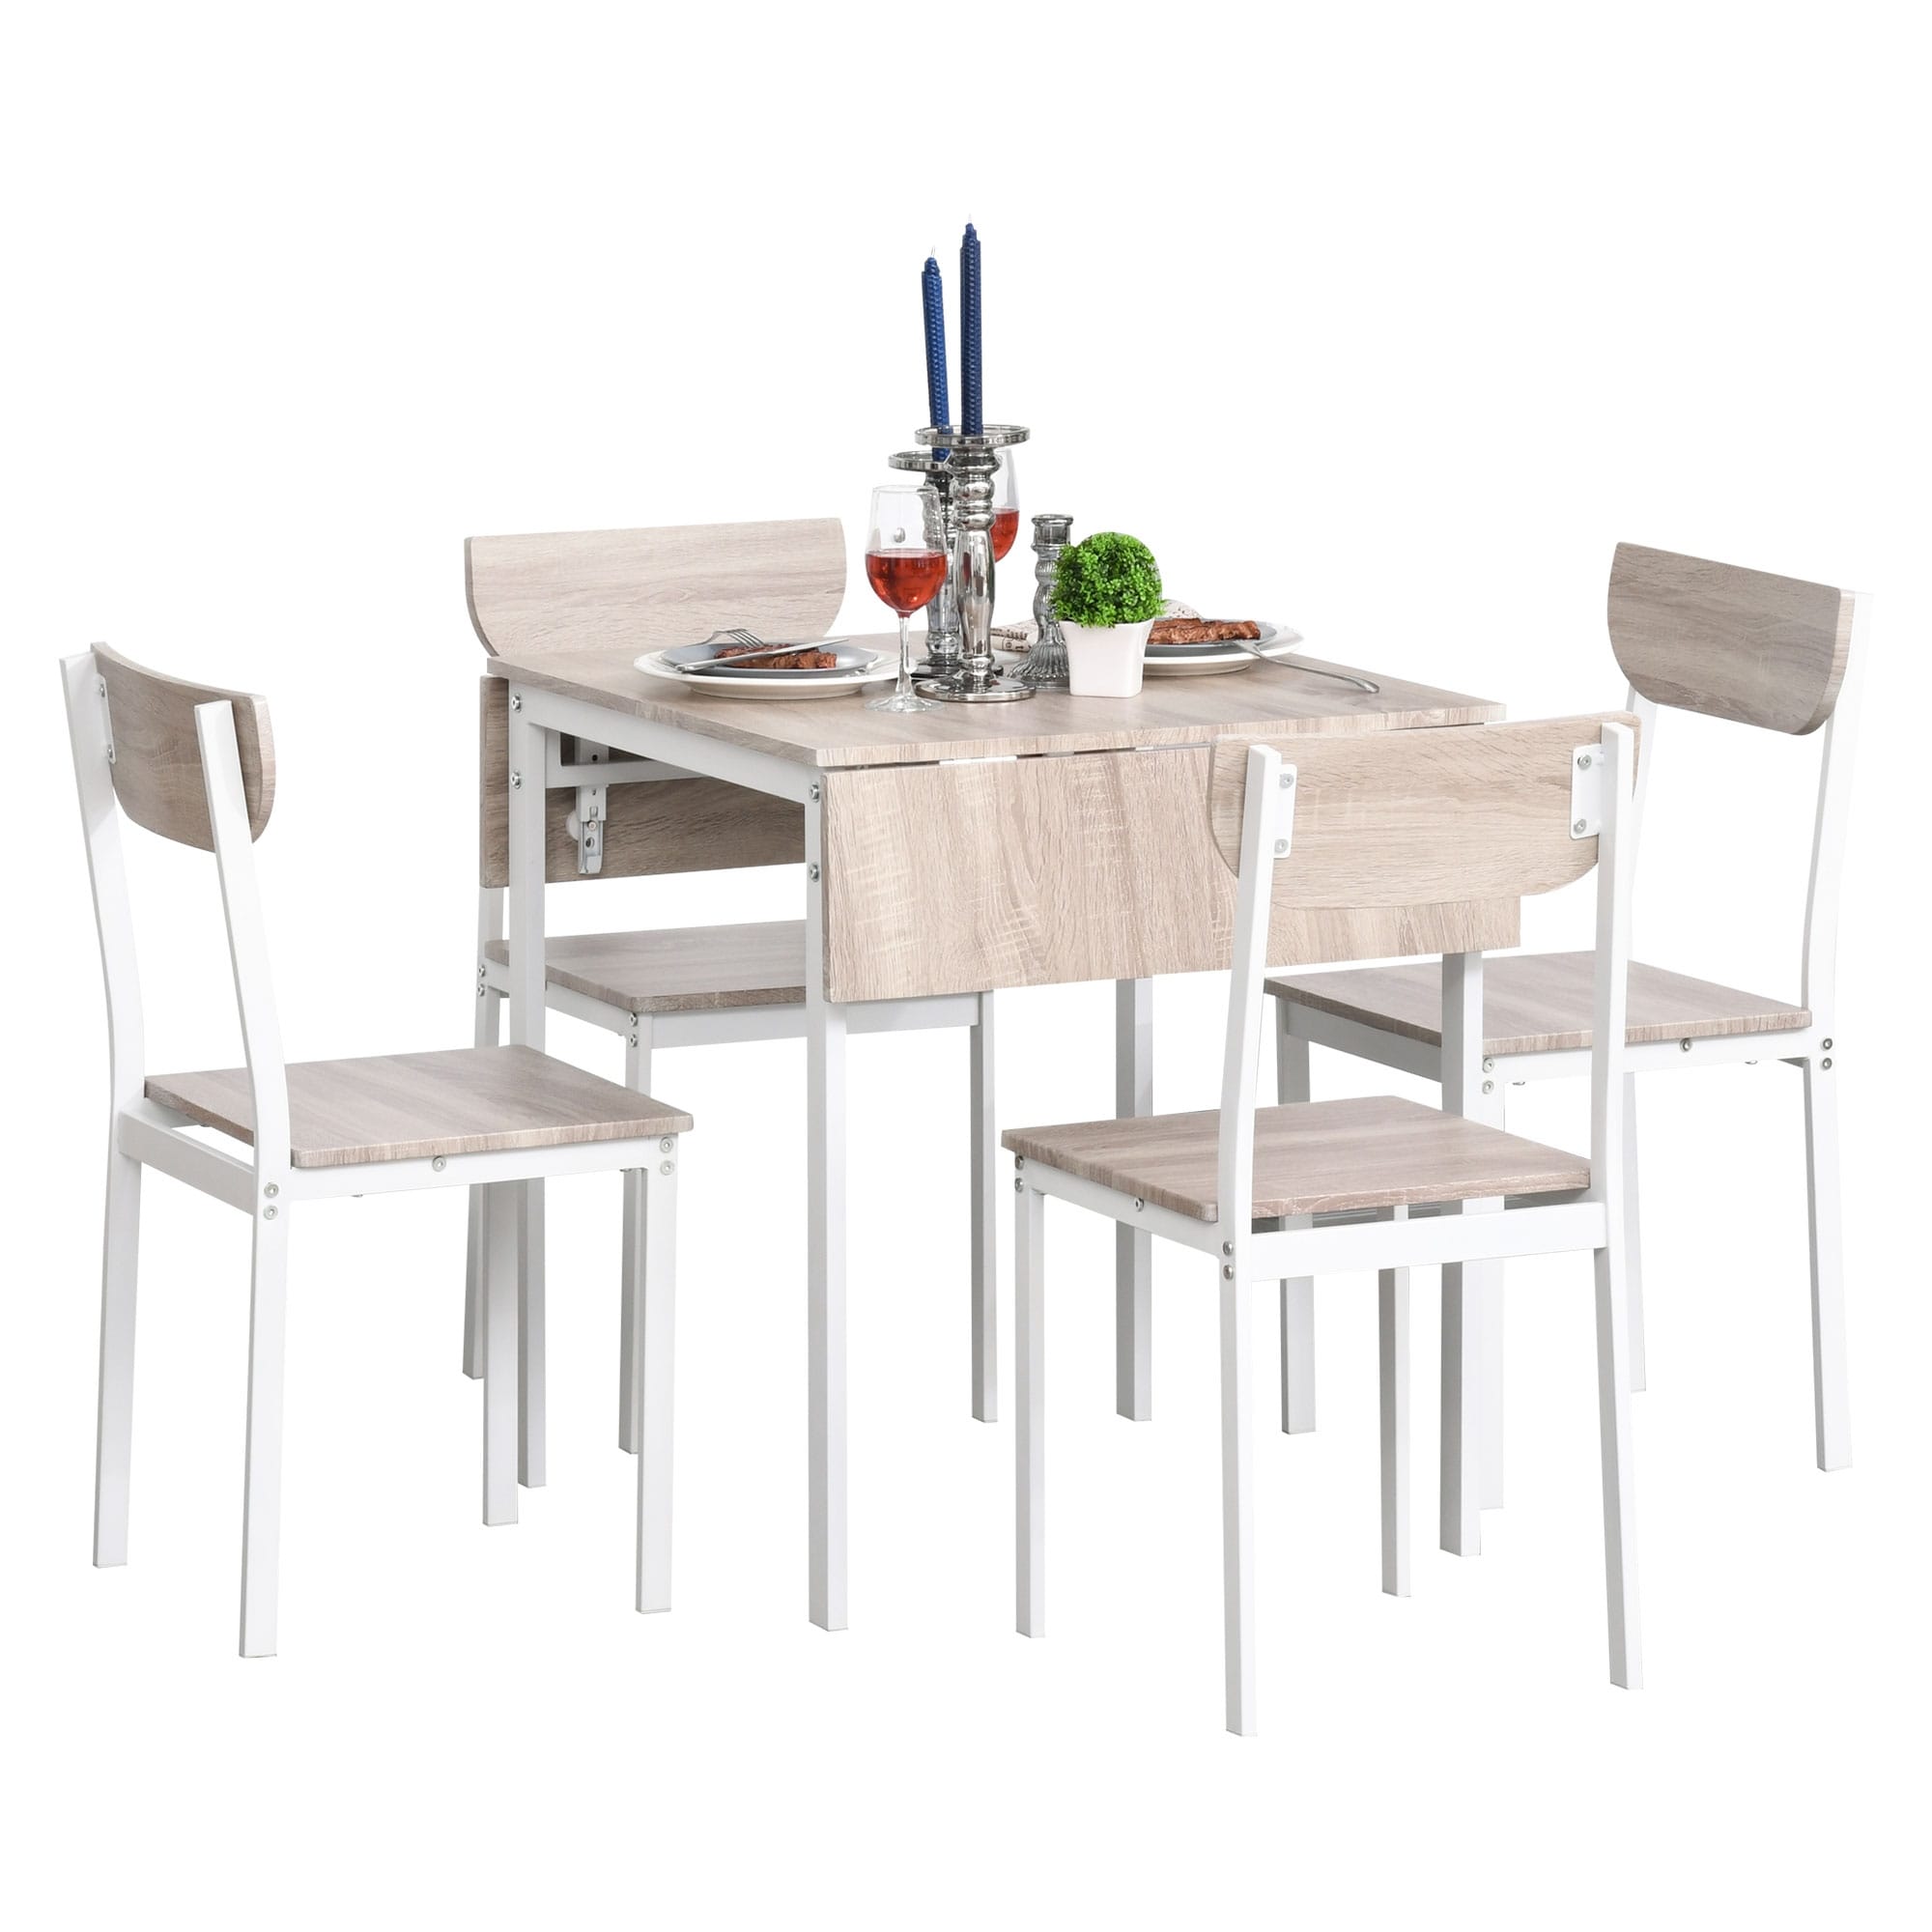 https://ak1.ostkcdn.com/images/products/is/images/direct/d00d546f541a53c191c2e6f3450585ef329ab70a/HOMCOM-Modern-5-Piece-Dining-Table-Set-for-4-with-Foldable-Drop-Leaf%2C-4-Chairs%2C-and-Metal-Frame-for-Small-Spaces%2C-White.jpg